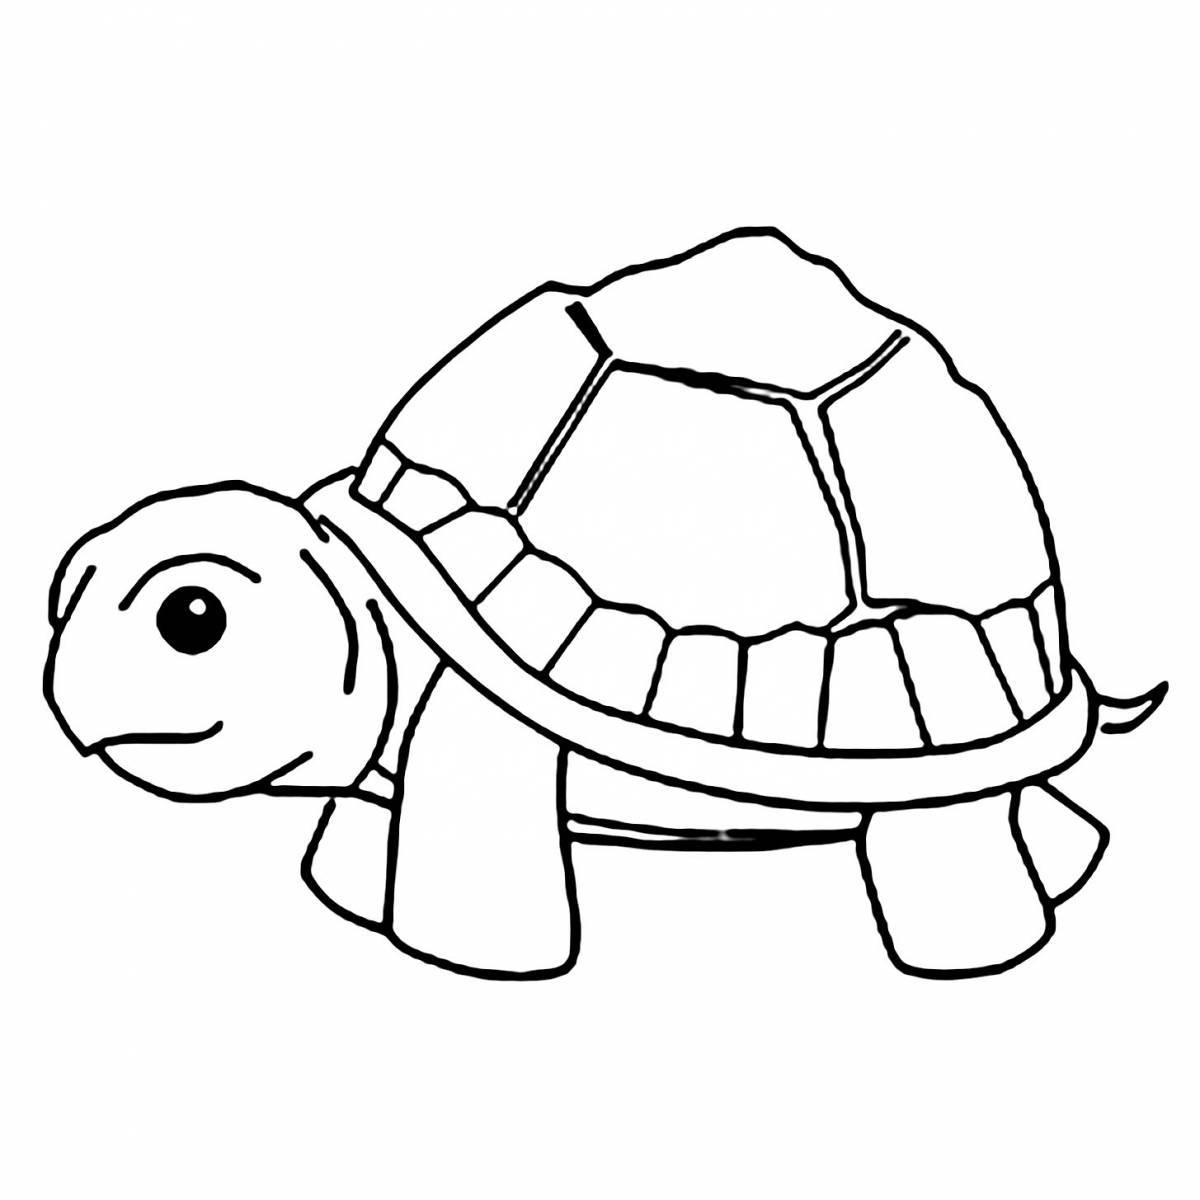 Magic turtle coloring book for kids